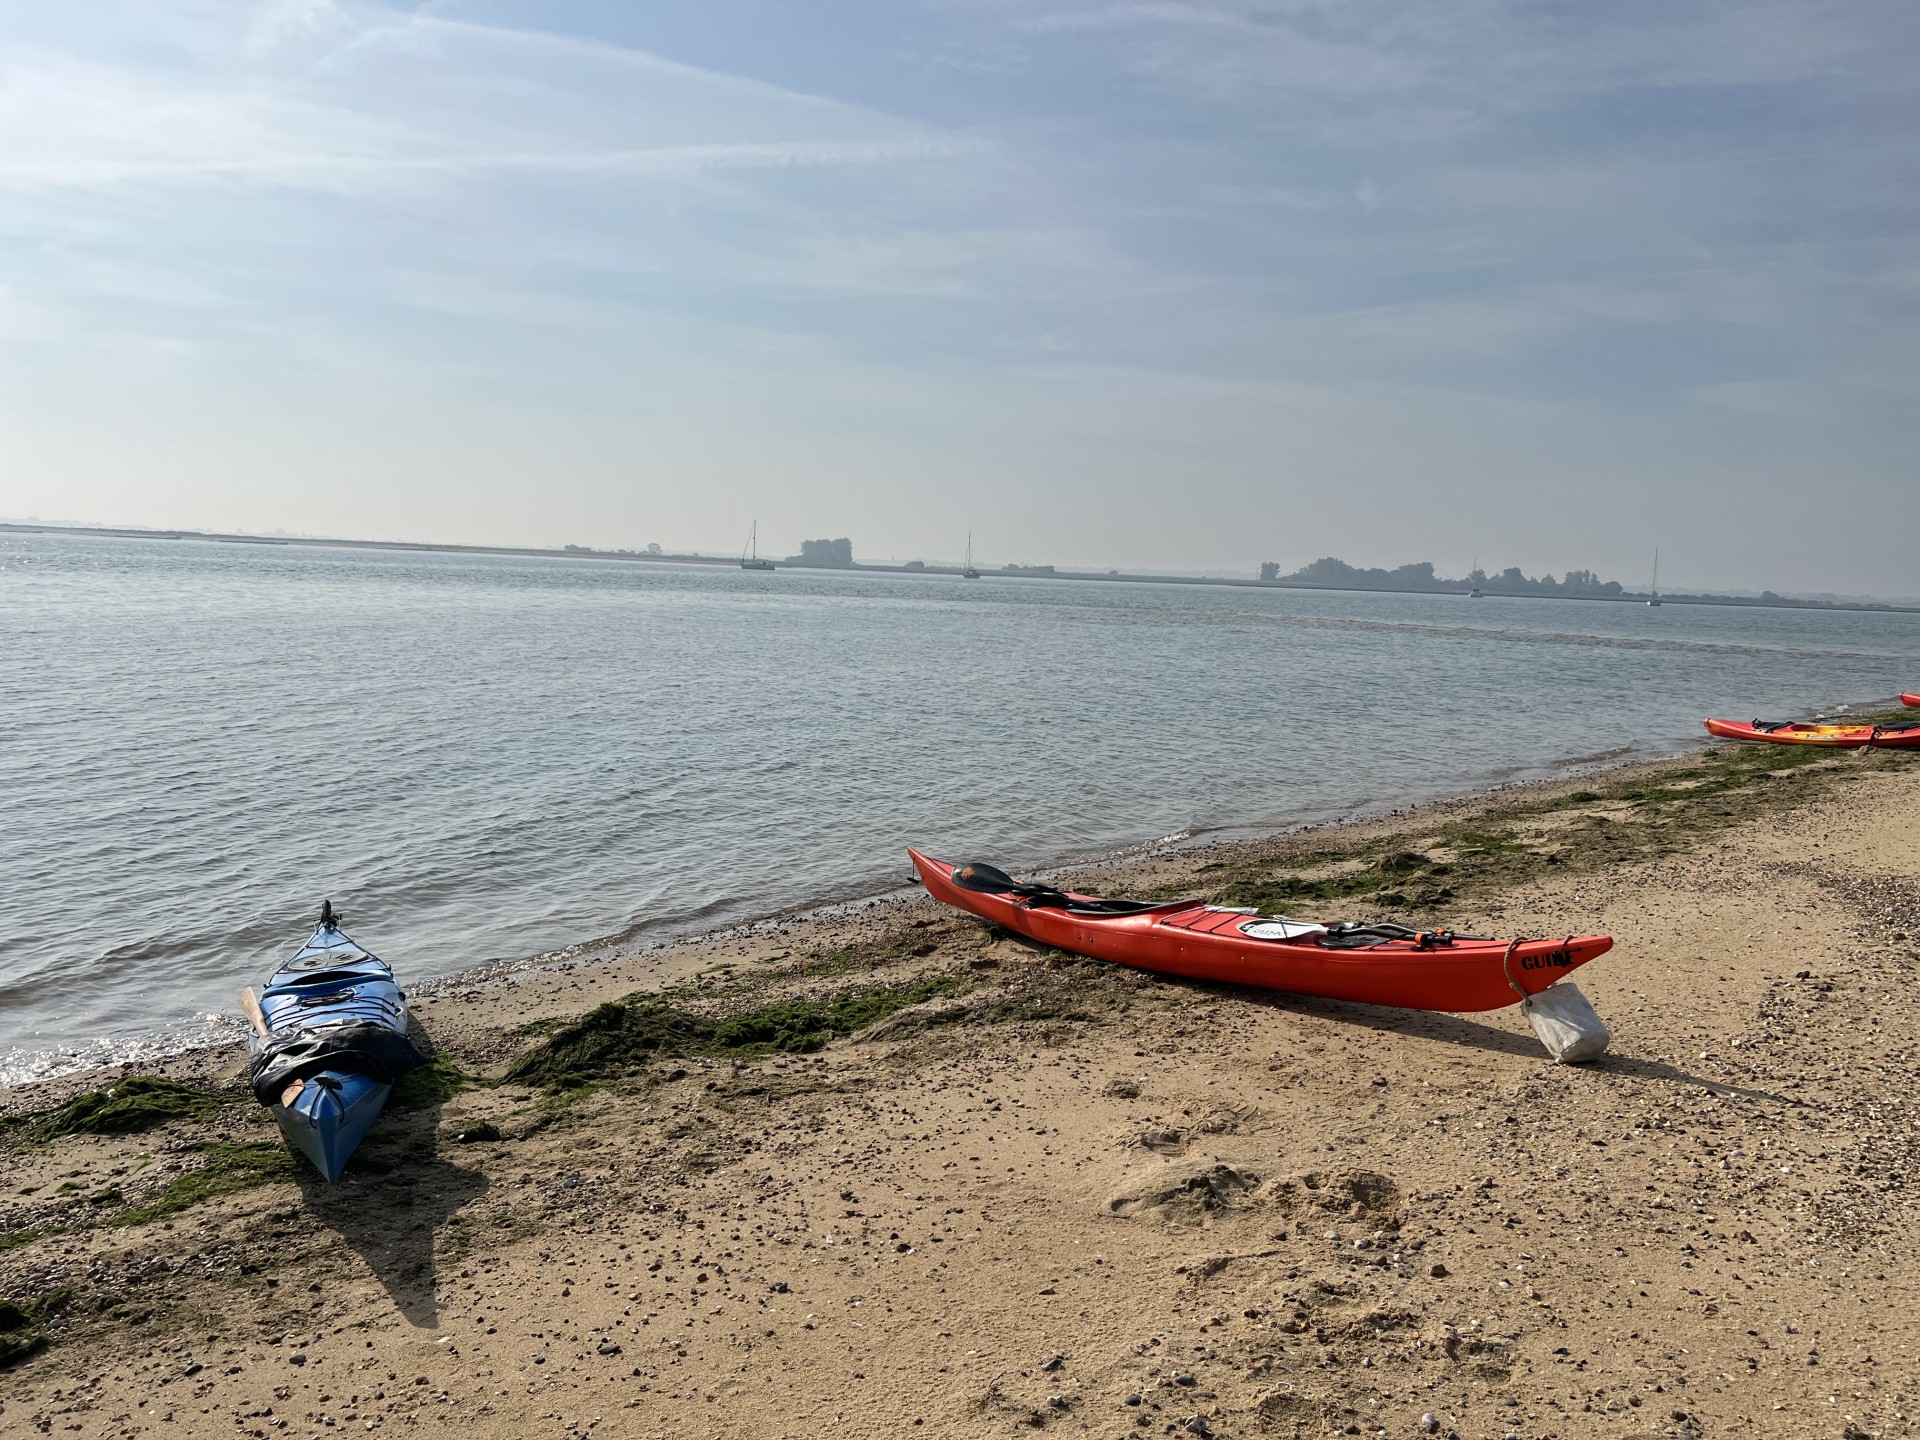 Sea kayaks on a beach with flat calm seas in background.